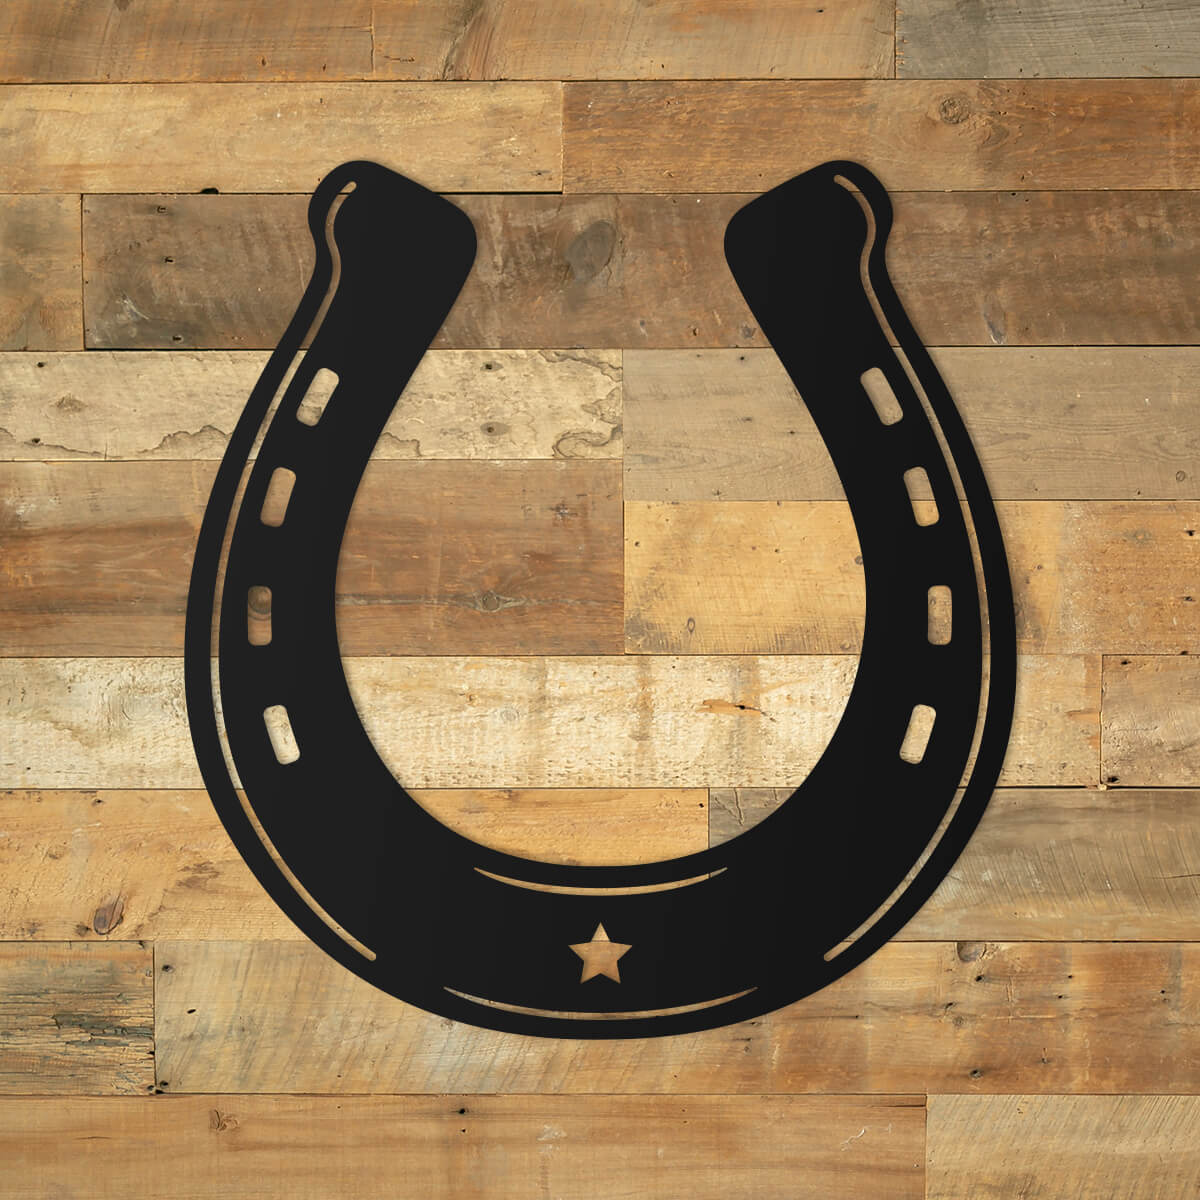 Wish Me Luck with our Good Luck Horseshoe Home Wall Decoration! - RealSteel  Center